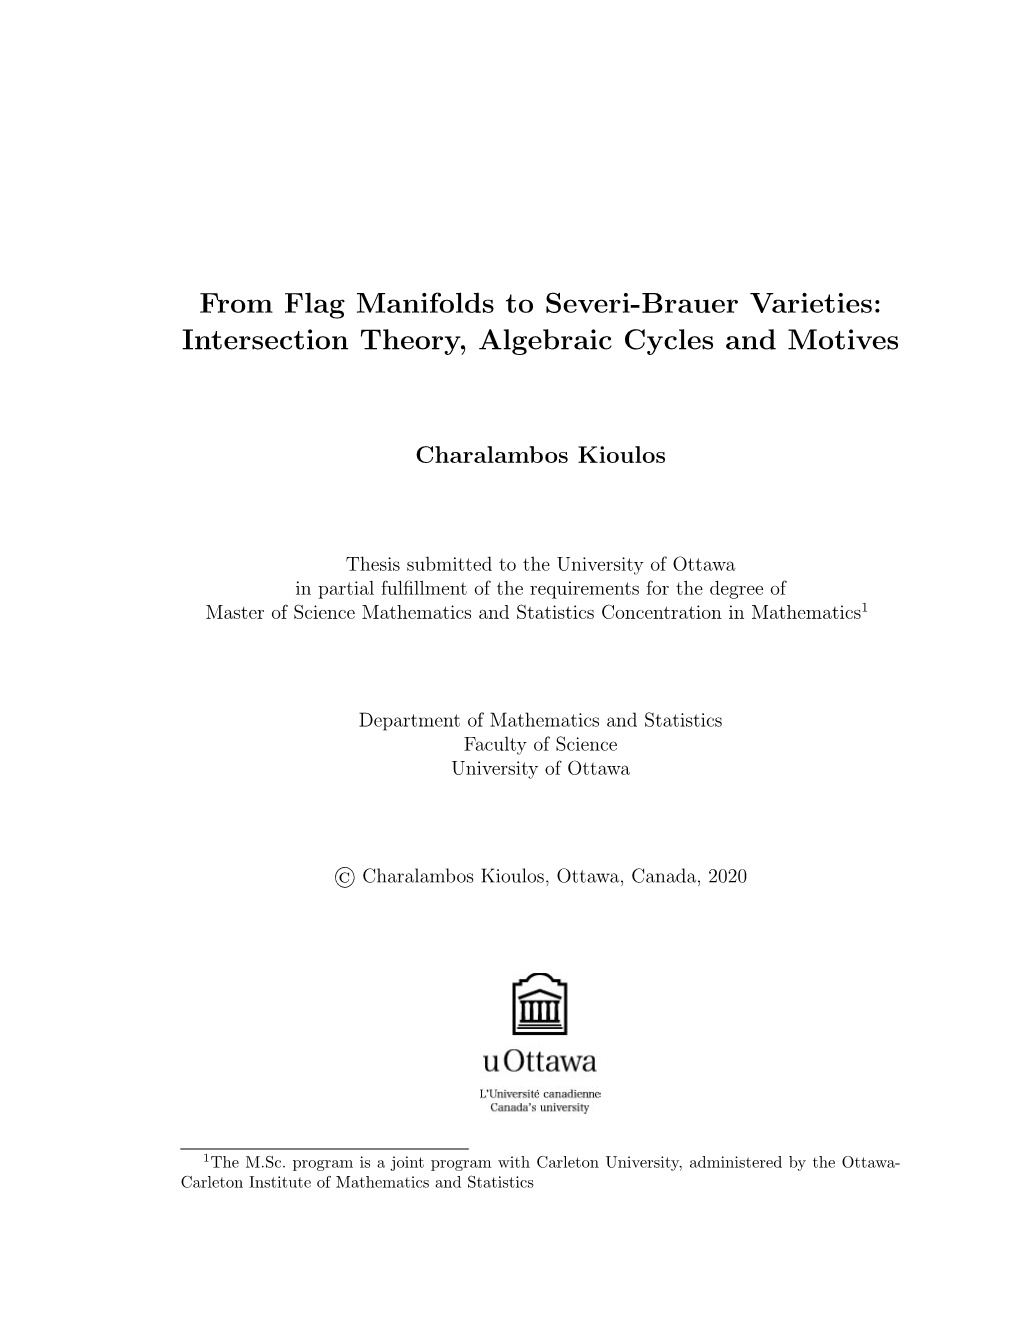 From Flag Manifolds to Severi-Brauer Varieties: Intersection Theory, Algebraic Cycles and Motives